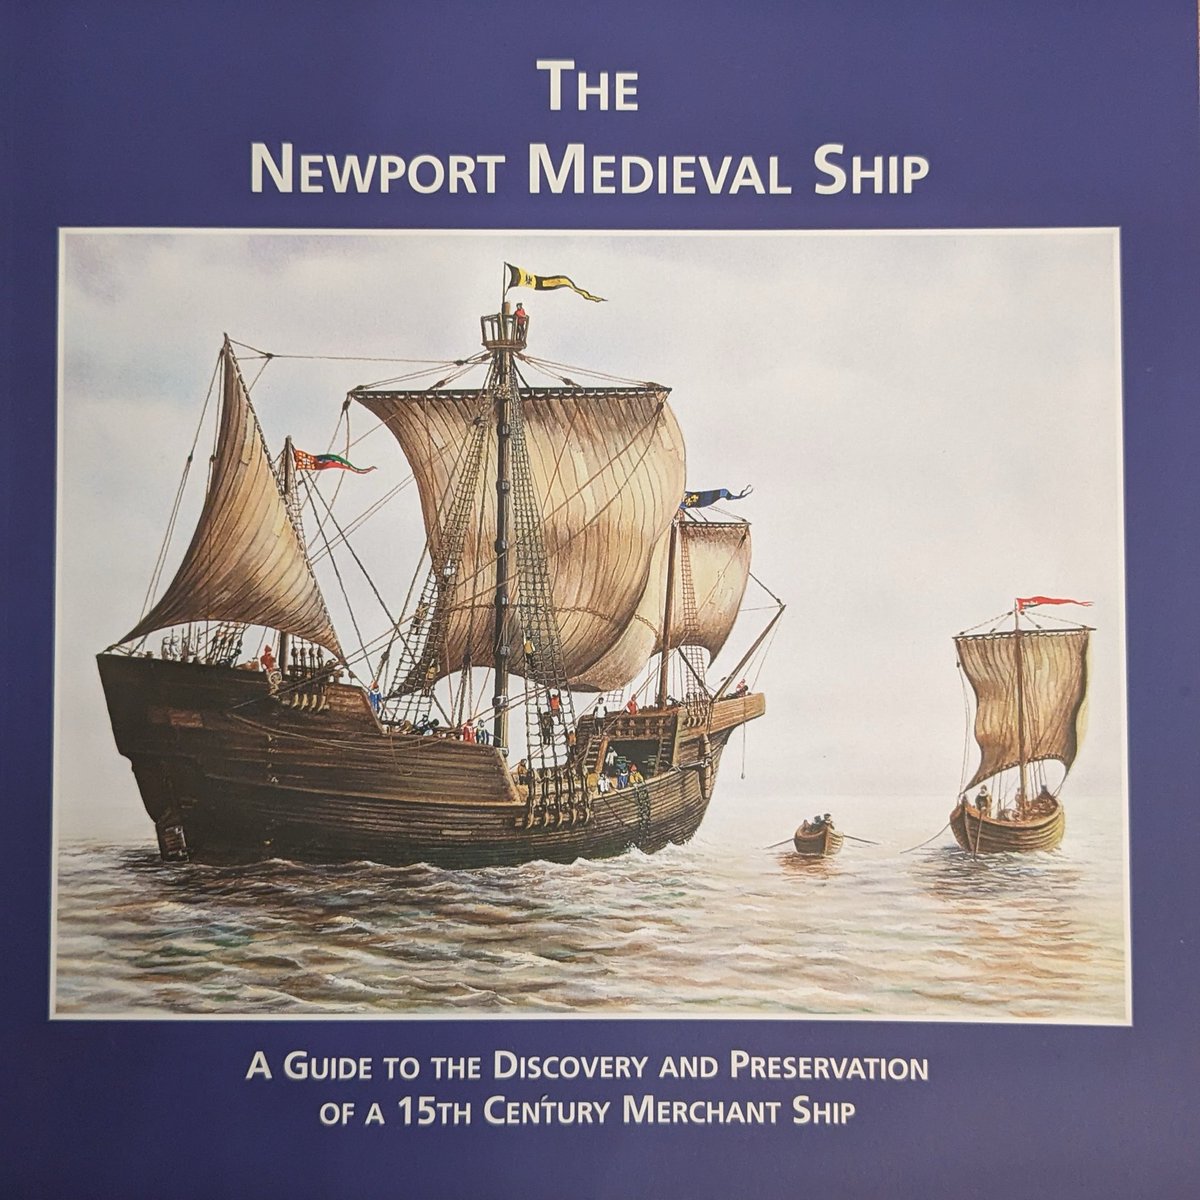 New @FONSNewportship @NewportShip guidebook available newportship.org/discover-the-s…  @NauticalHistory 
@NautArchSoc @RuthNewportWest @CllrJaneMudd @JGriffithsLab @WelshMuseumsFed @Heritage_NGOs